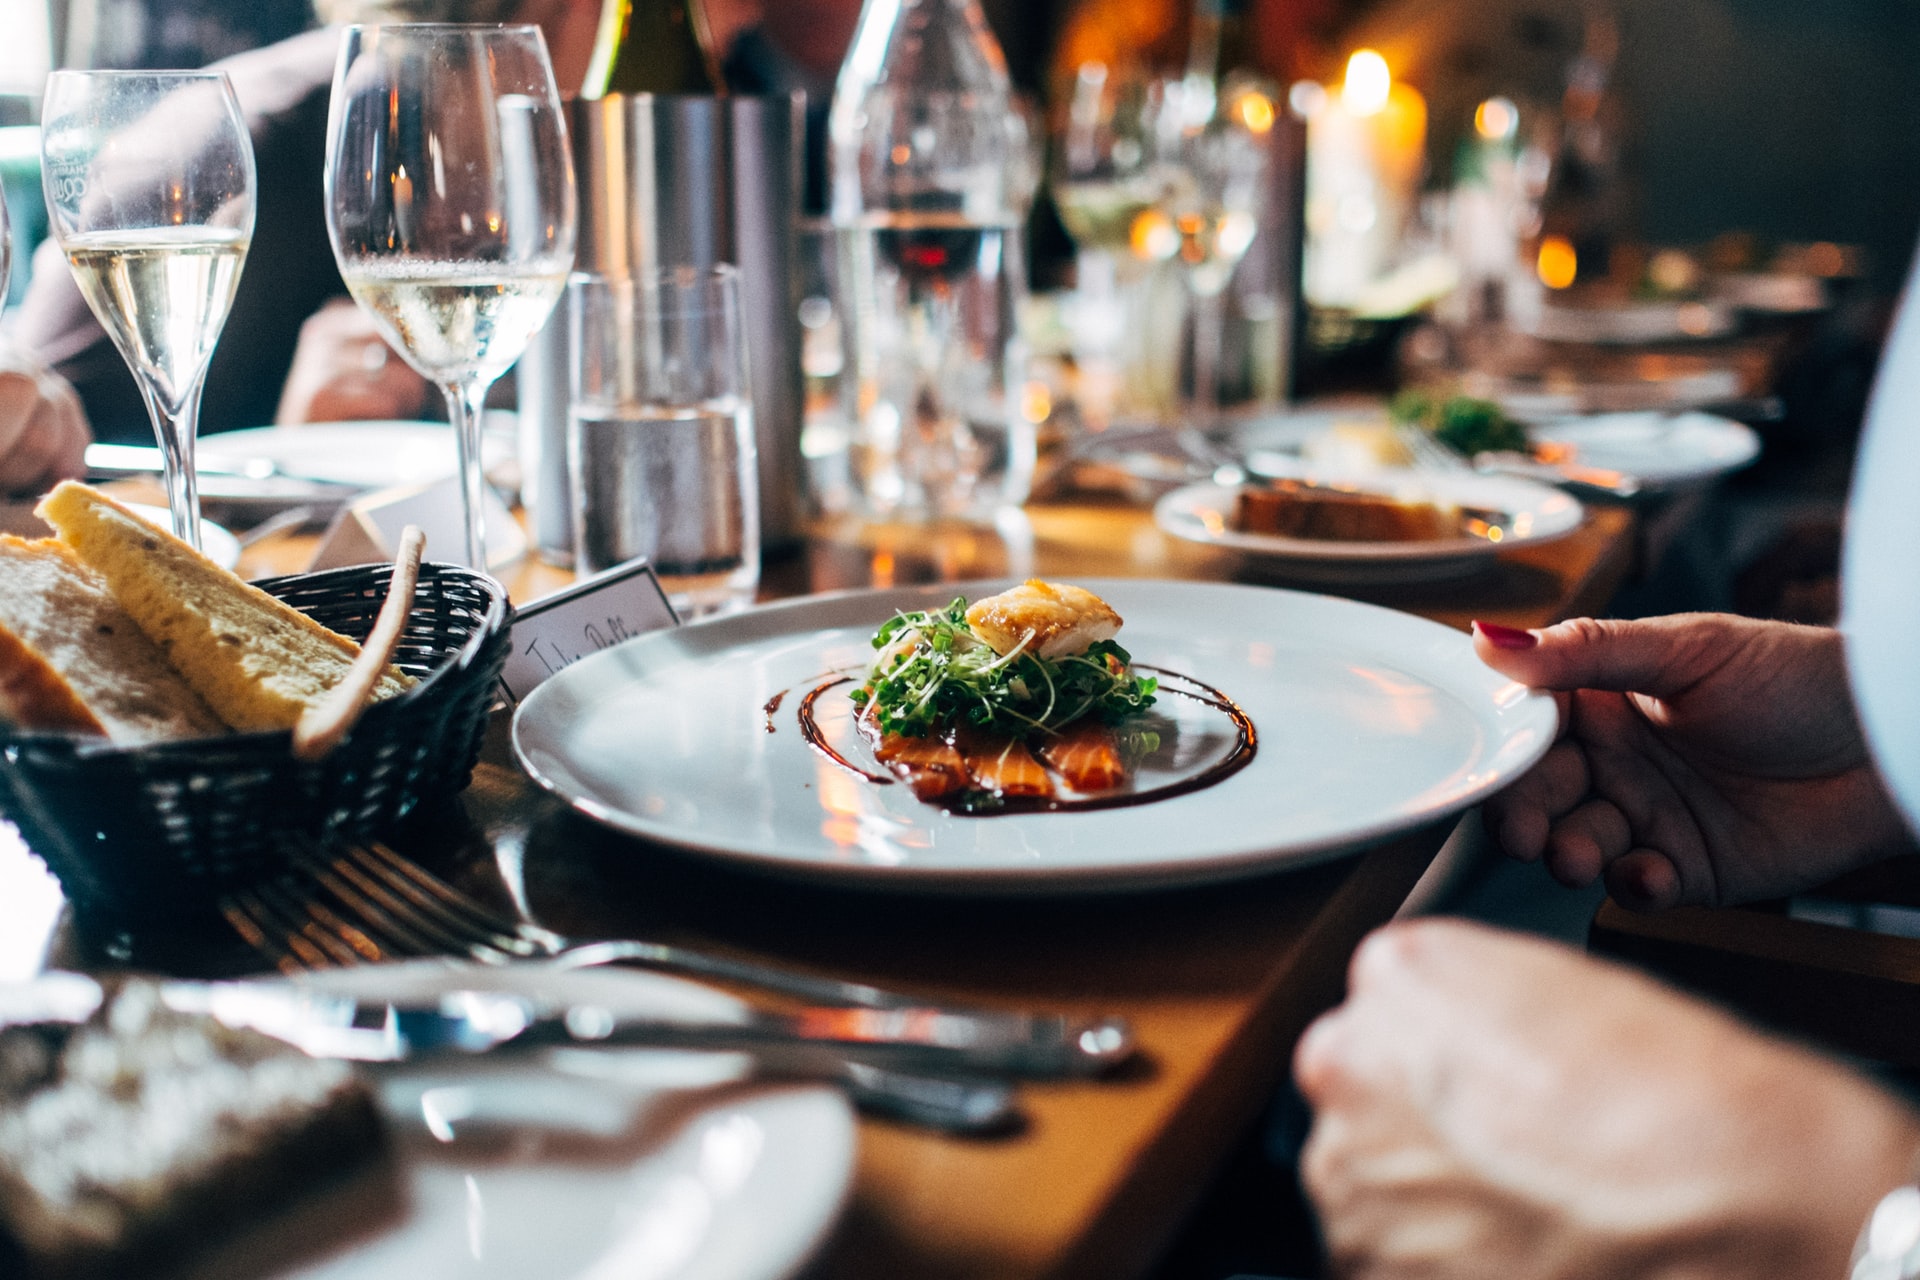 How to Increase Your Restaurant’s Value